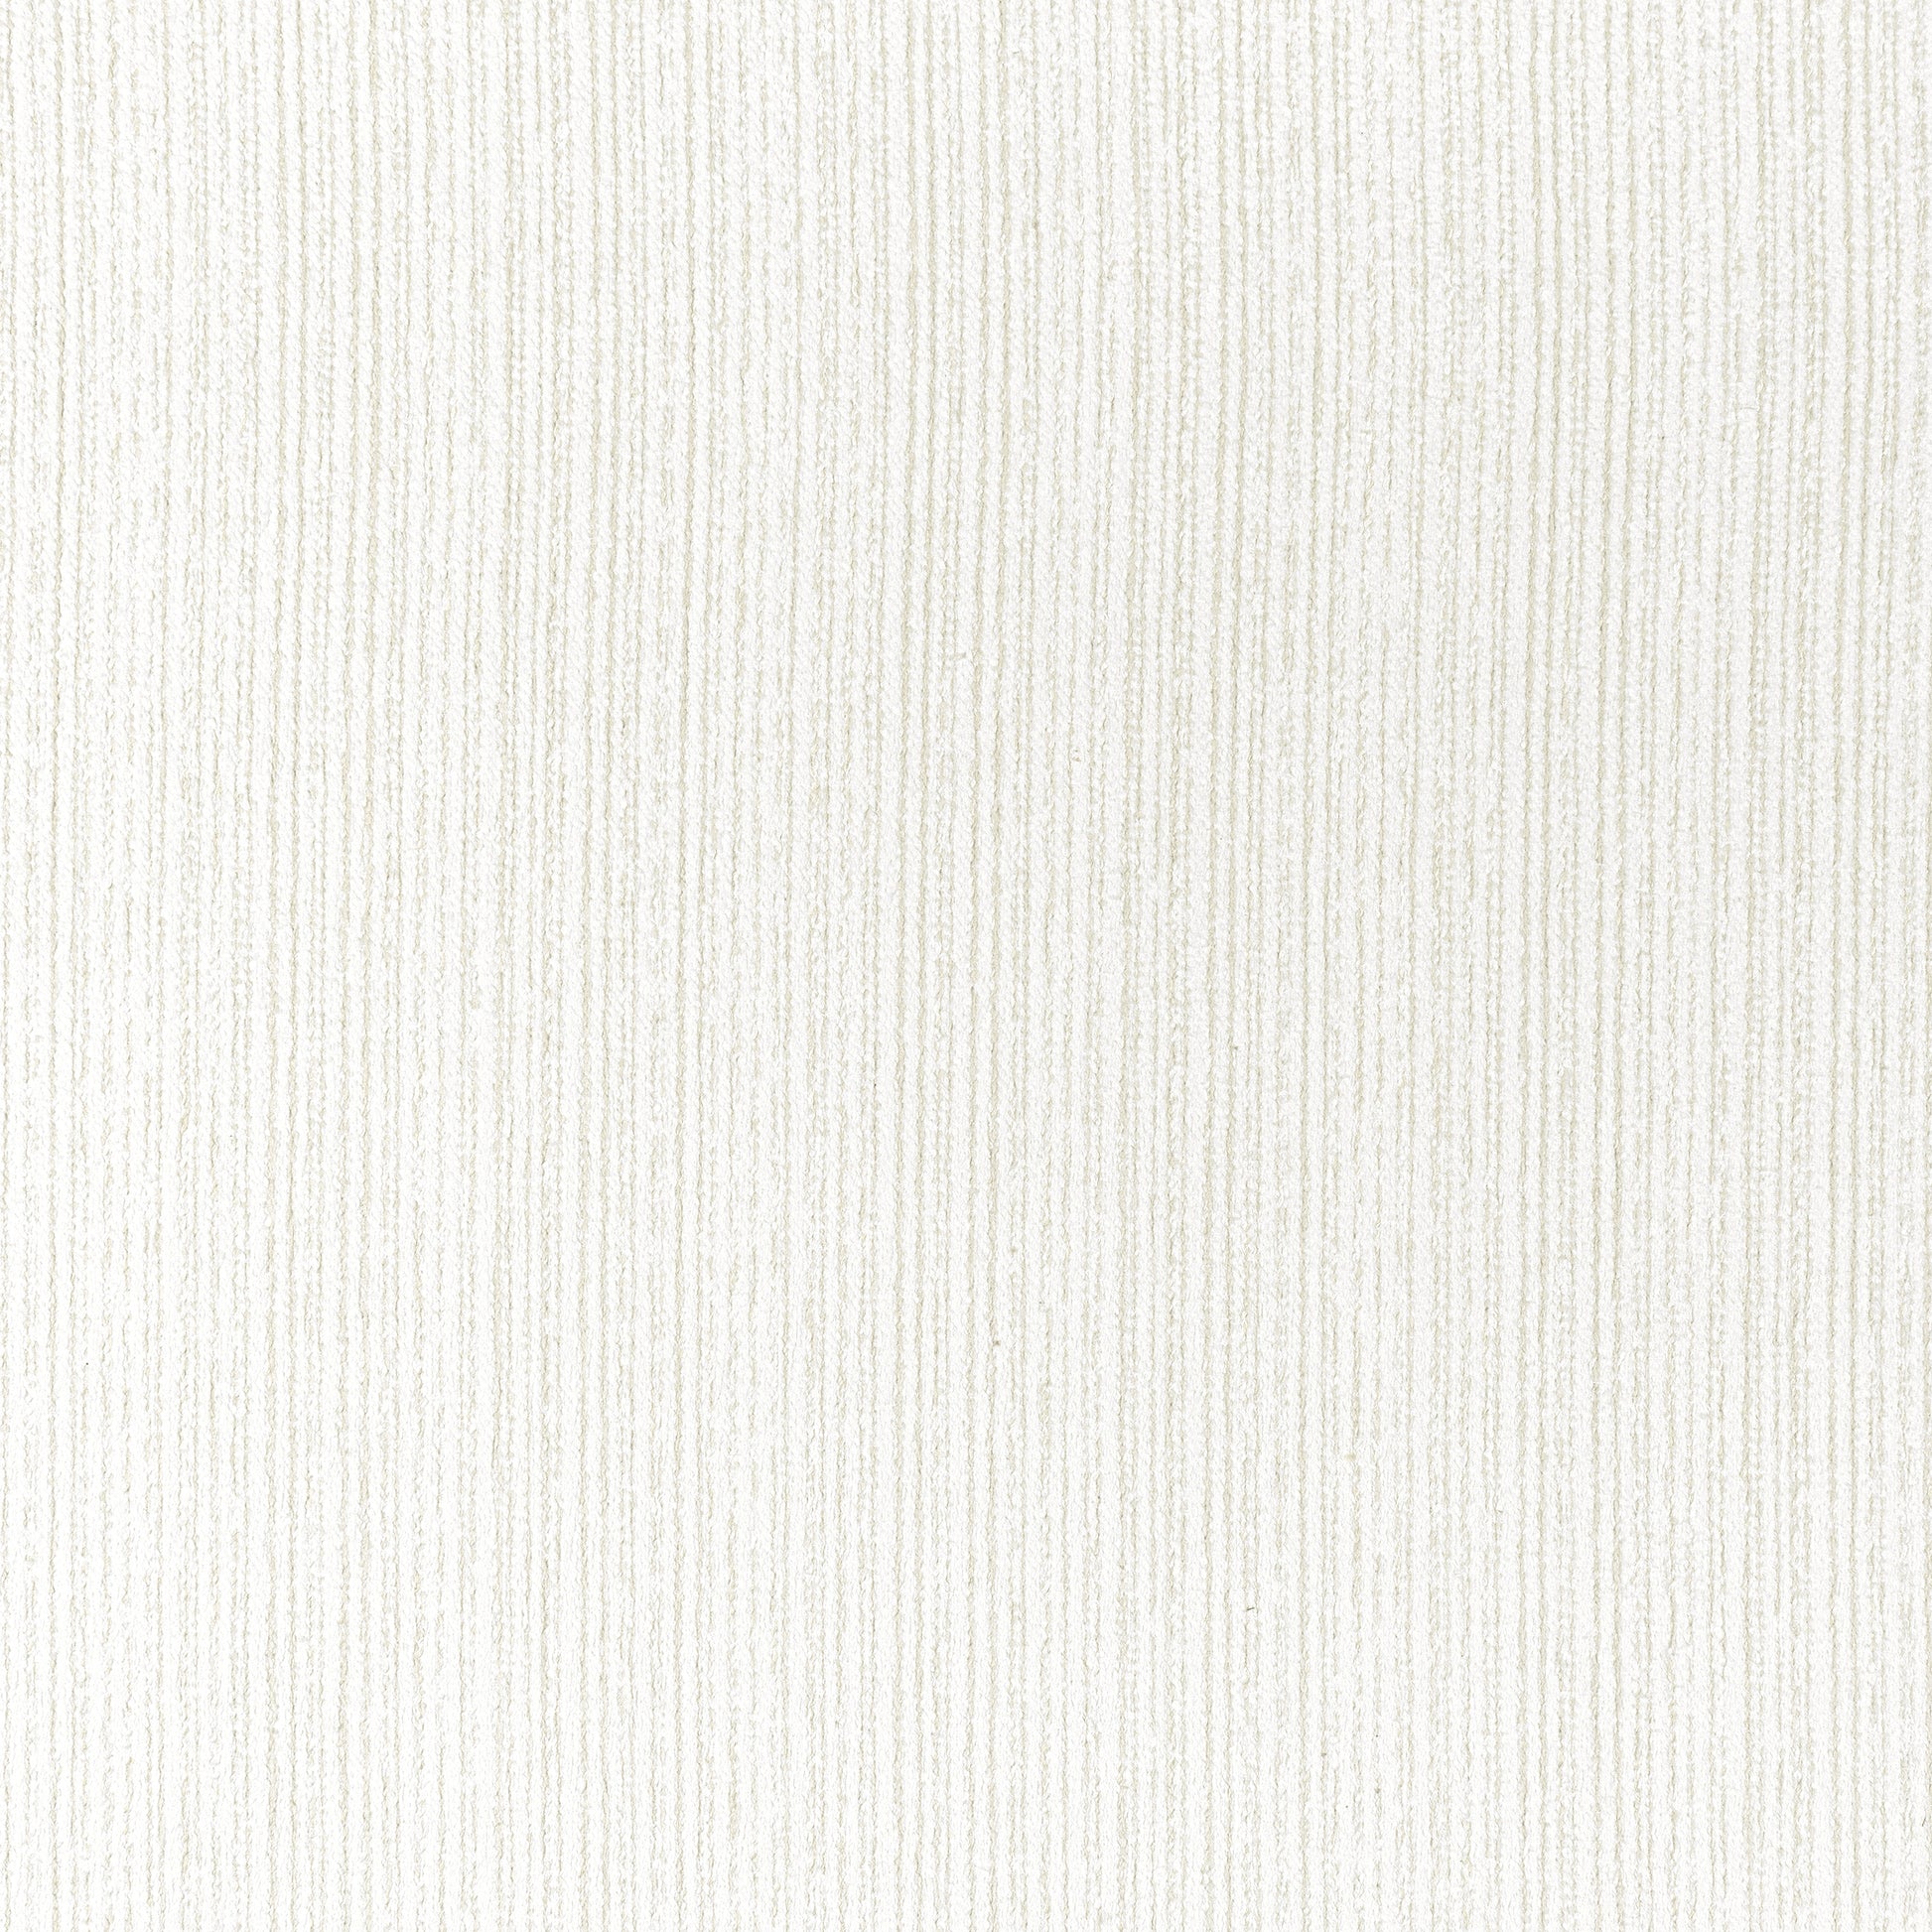 Purchase Thibaut Fabric Product W8802 pattern name Zia Stripe color Salt